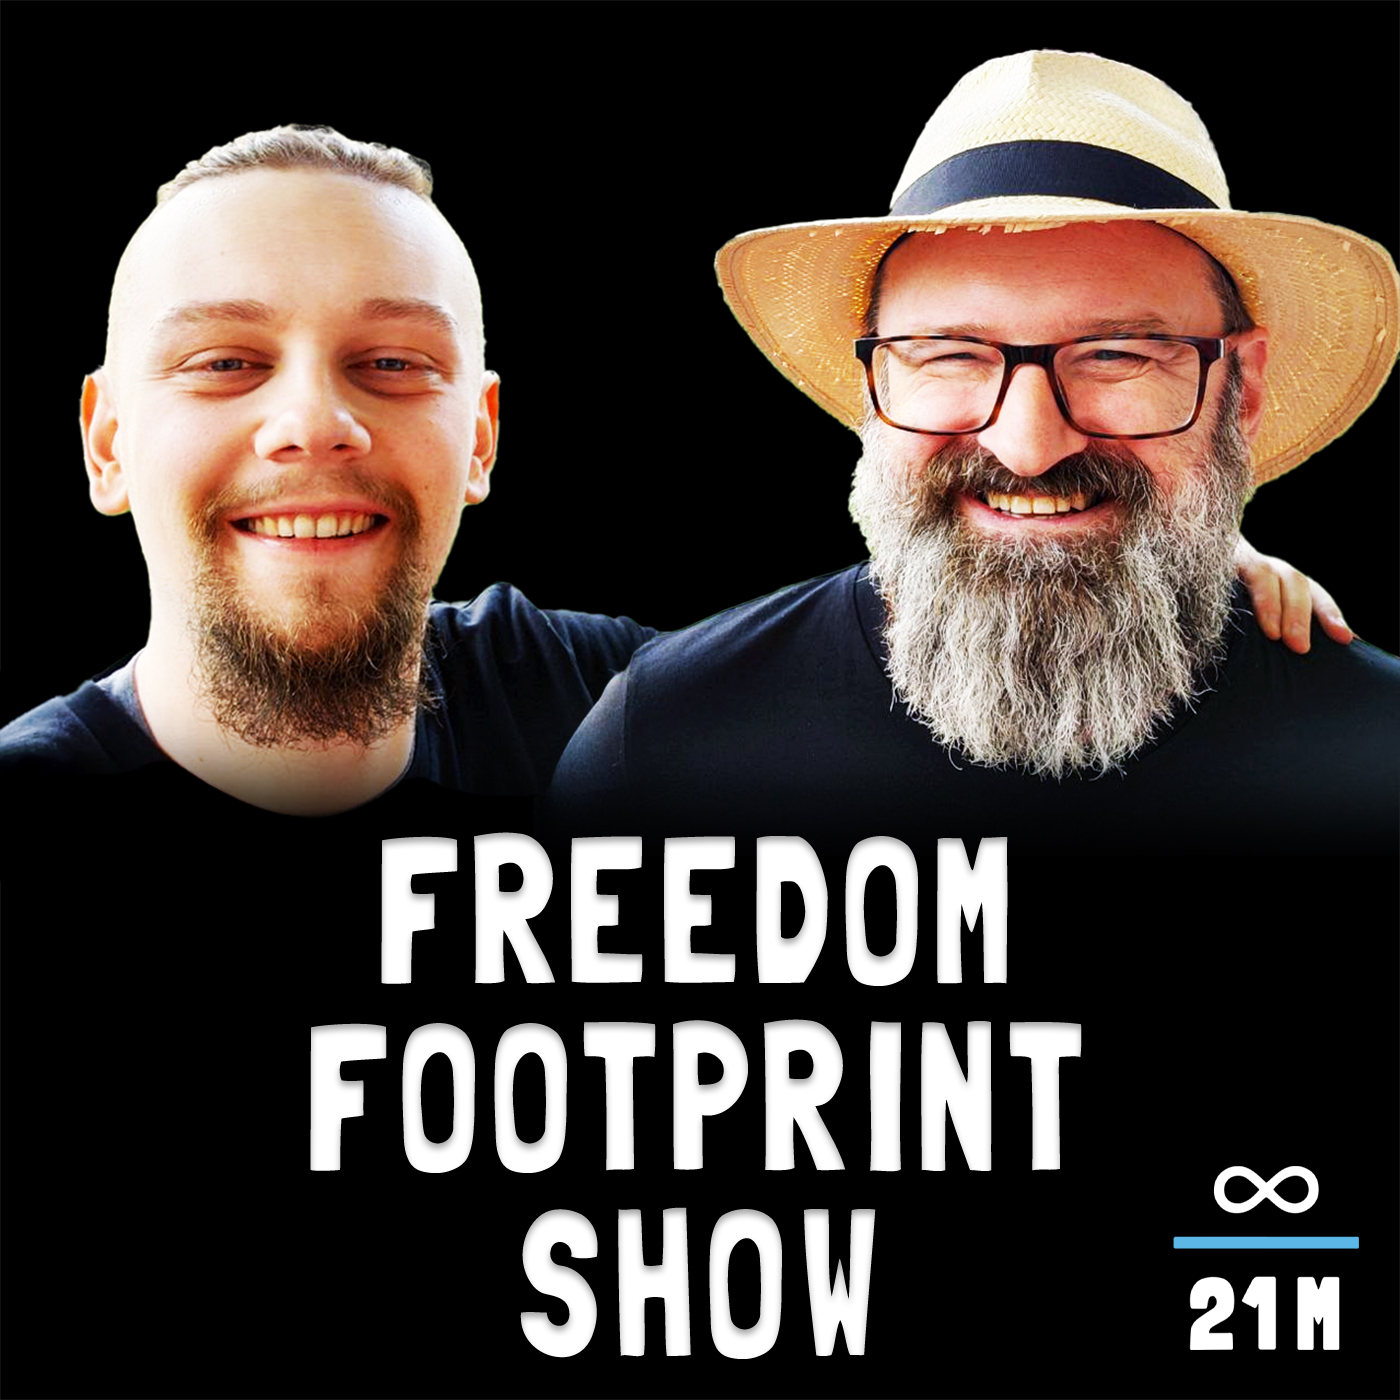 Freedom Footprint and Friends #1 - Ioni Appelberg and Knut on Oppenheimer